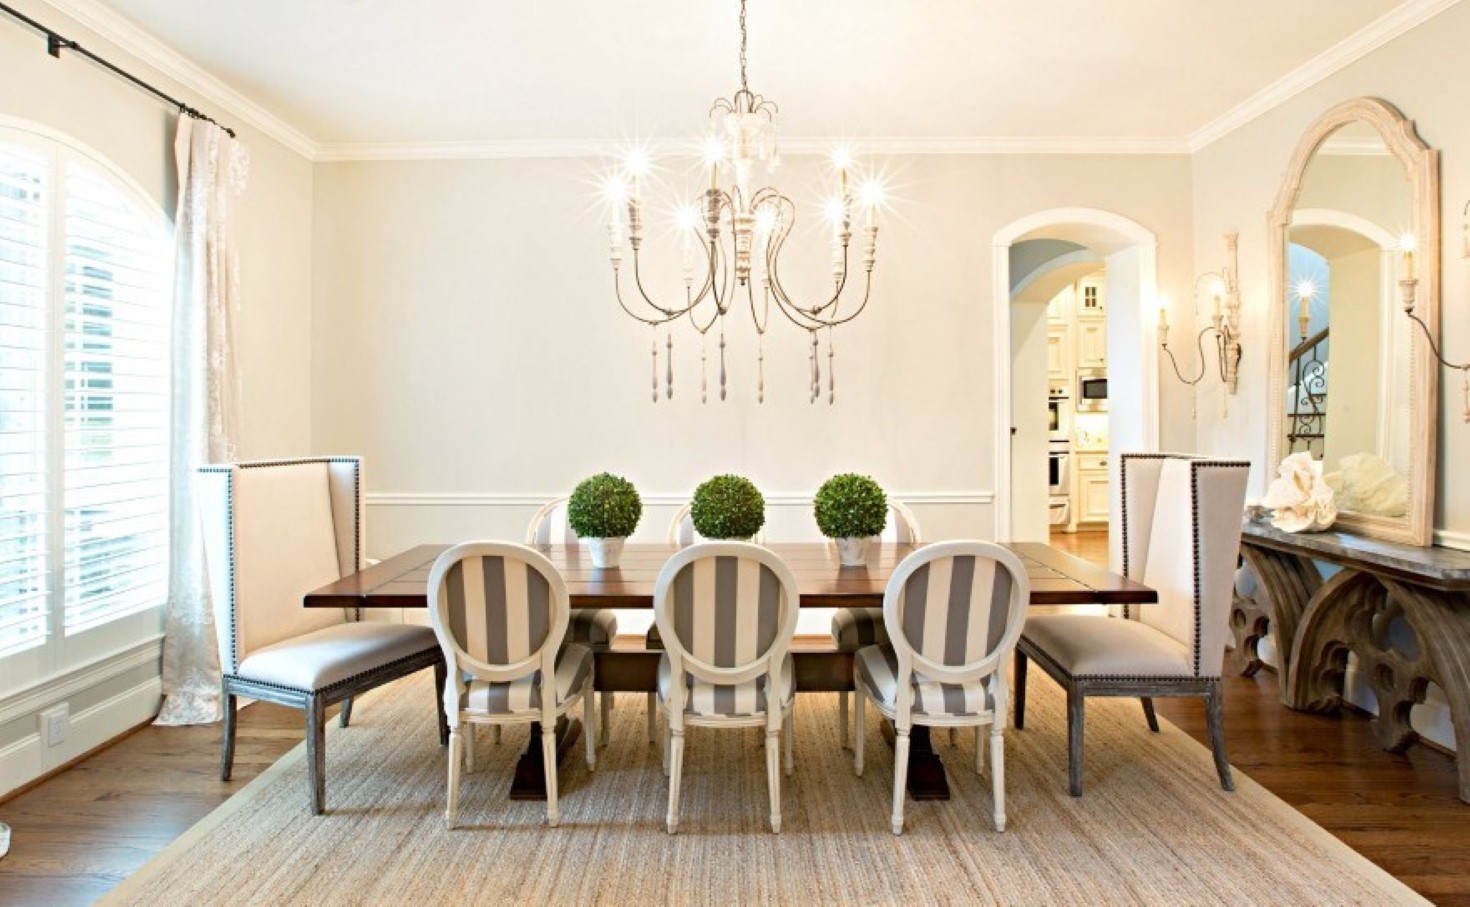 Chandelier Design Upholstered Large Chandelier Design Feat Funky Upholstered Dining Chairs And Cute Topiaries Table Centerpiece Idea Dining Room  Beautiful Upholstered Chairs To Renew Dining Room Atmosphere 